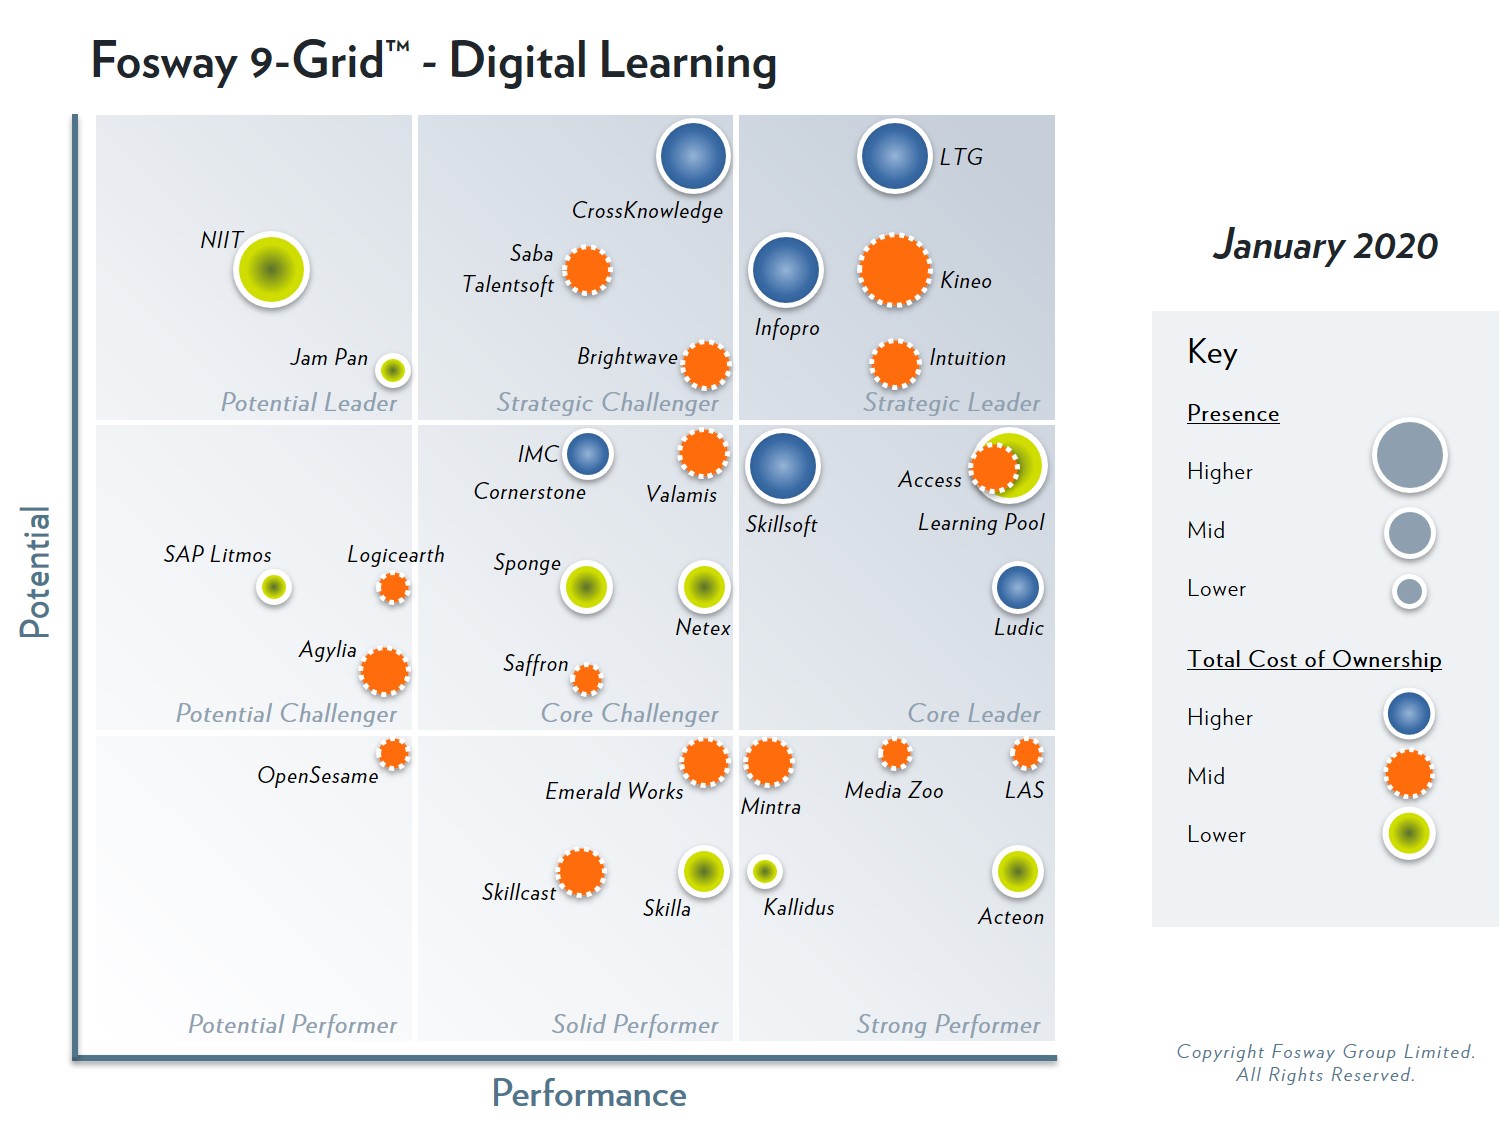 Learning Technologies Group has been identified as Strategic Leader in the 2020 Fosway 9-Grid™ for Digital Learning